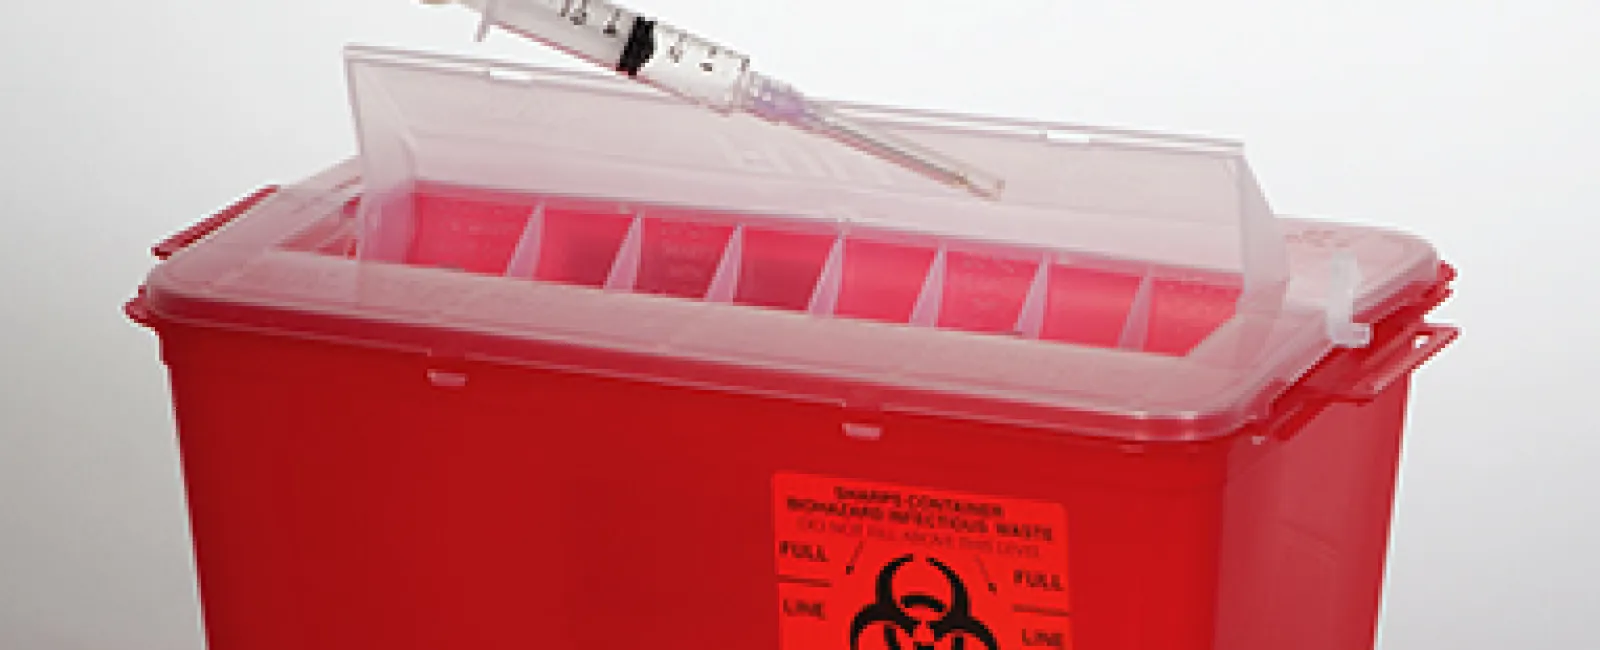 Regulated Waste Management: Red Bags & Sharps Containers Considerations